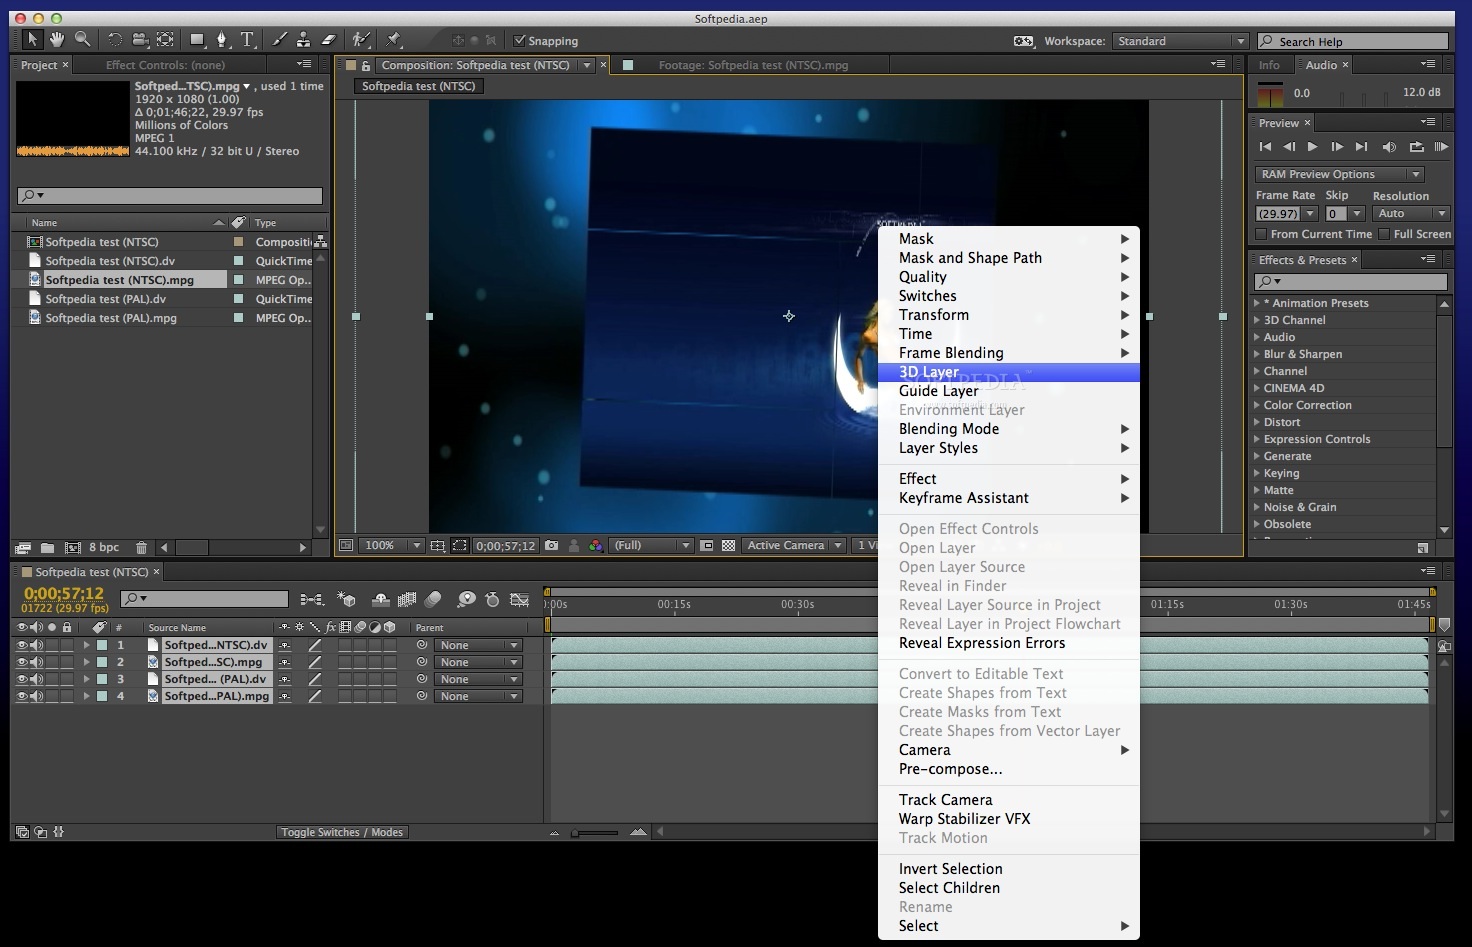 adobe after effects 5.5 trial download mac